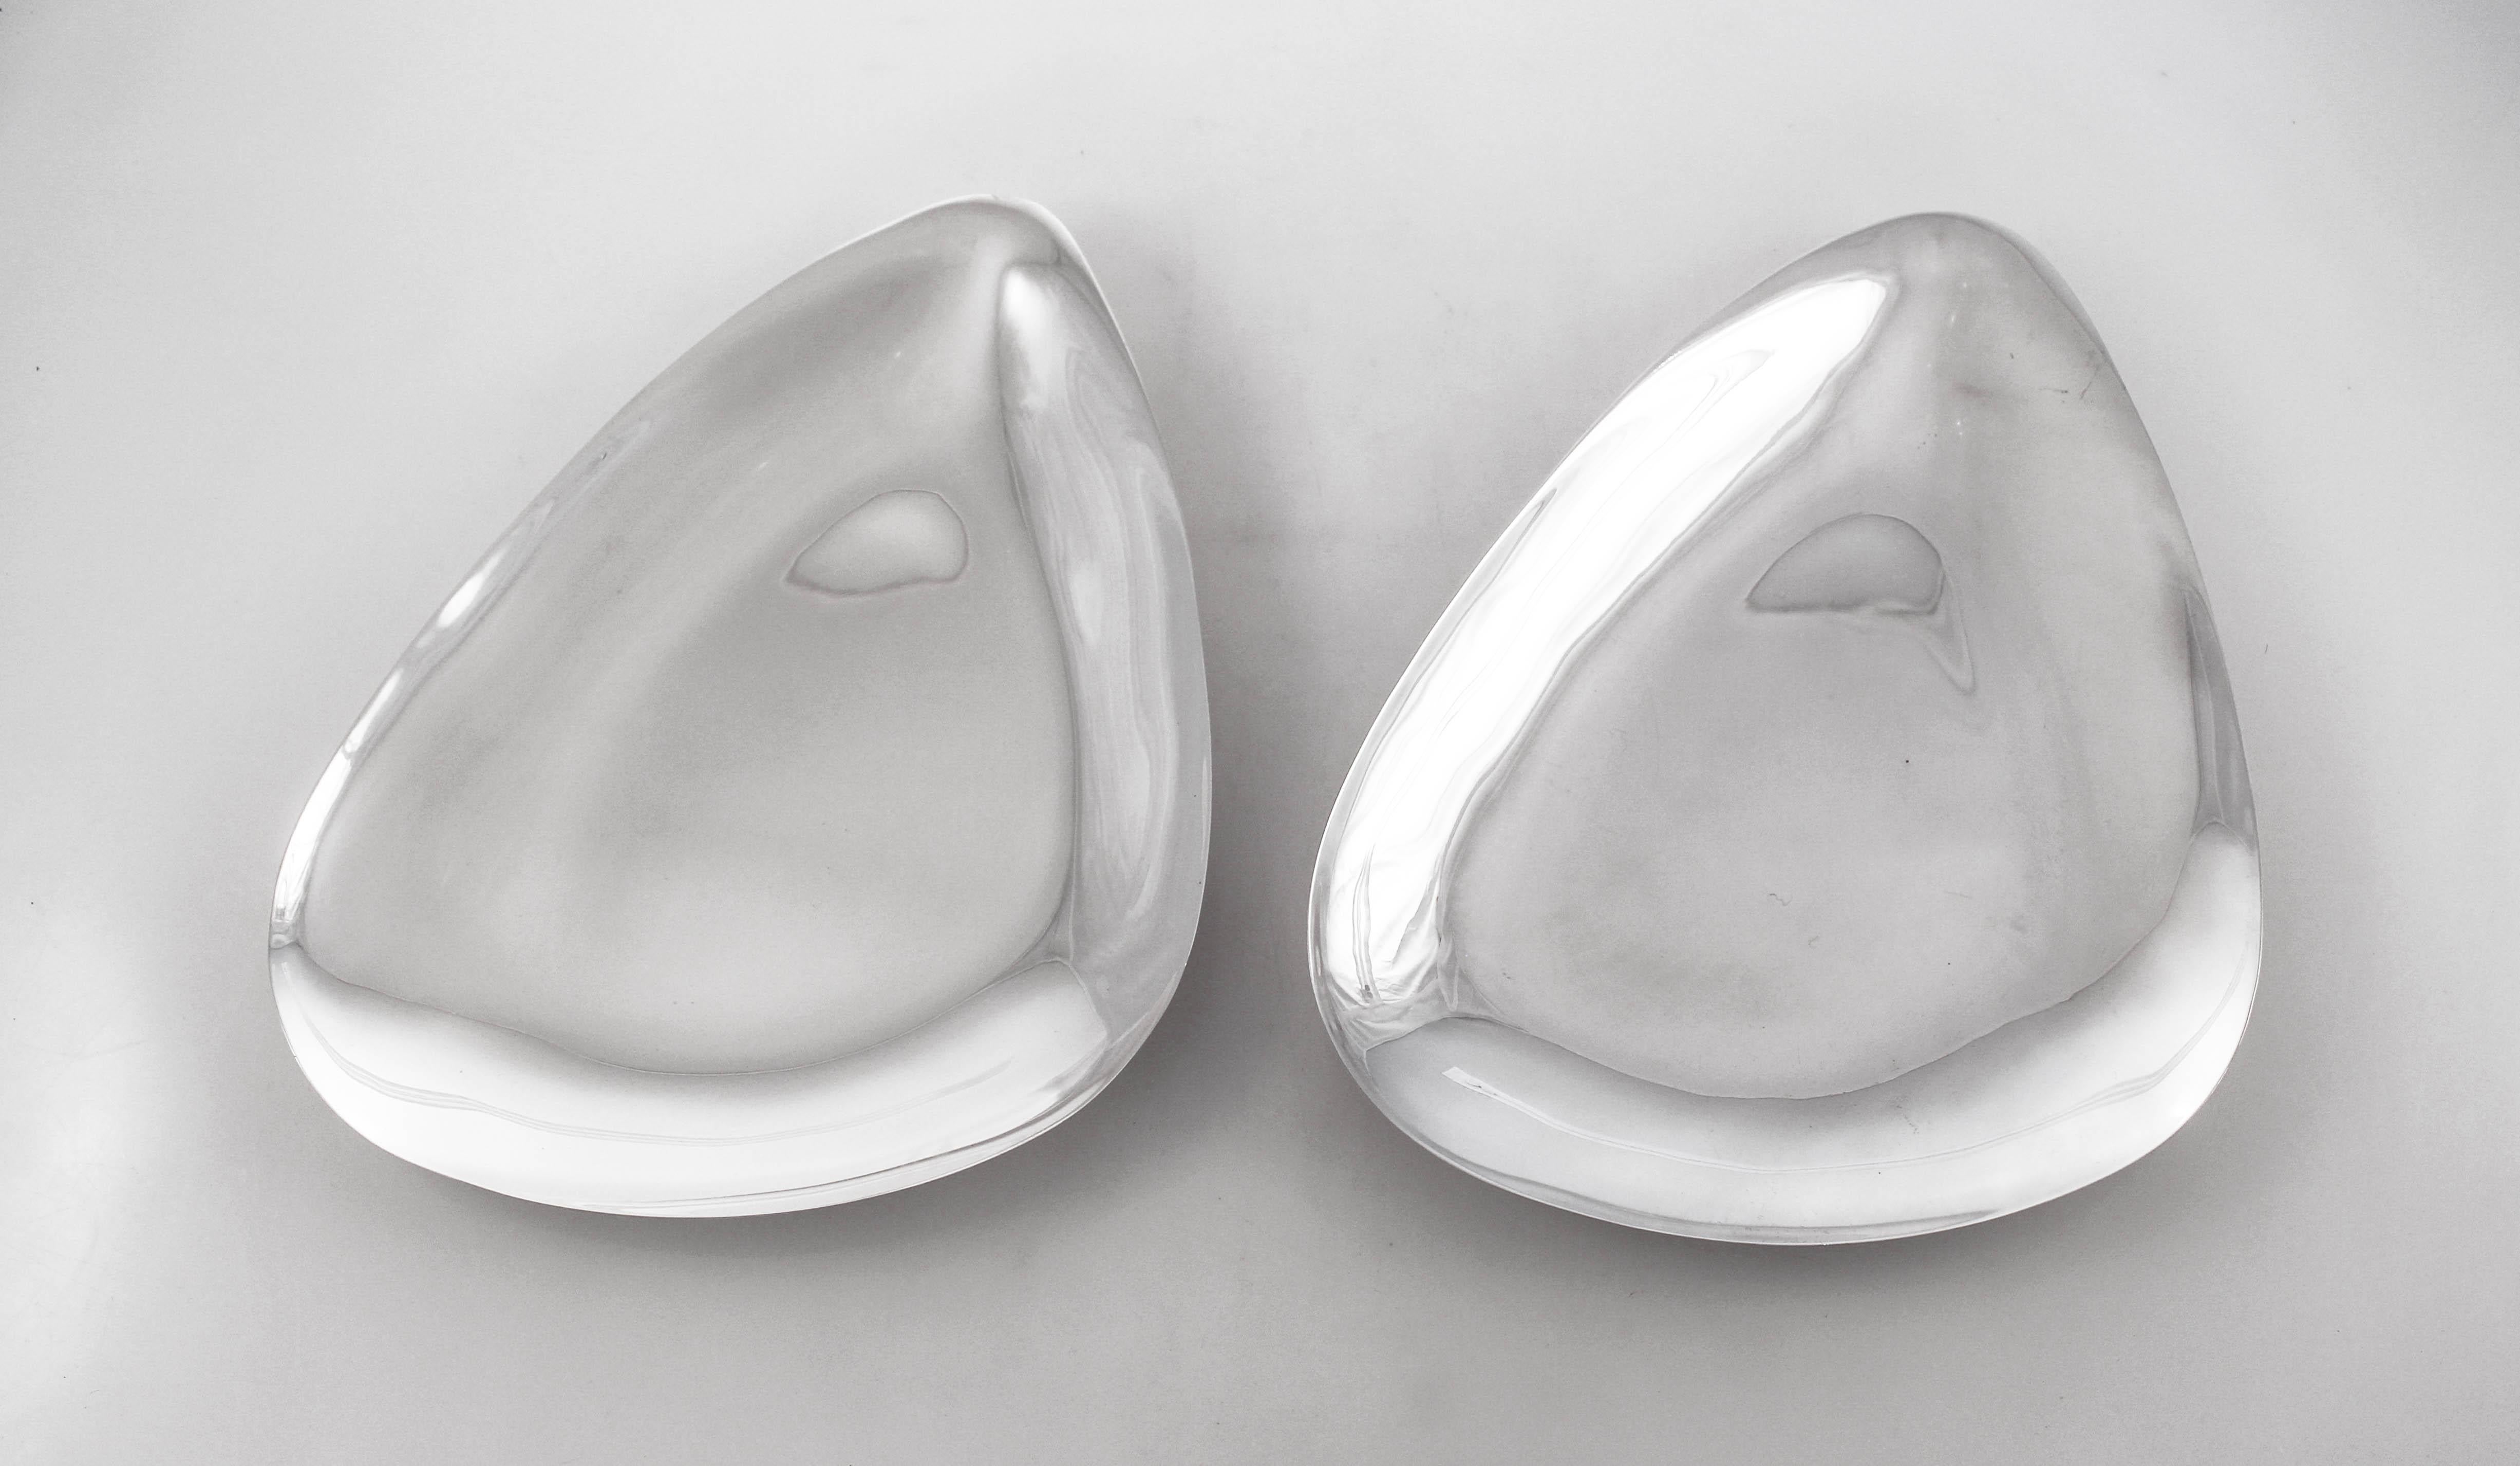 An incredible pair of sterling silver midcentury dishes by Reed and Barton. This pair is sure to wow you and your guests. Abstract but with a triangular shape, they are sleek and uber-modern. No etchings or designs, they have a smooth and clean look